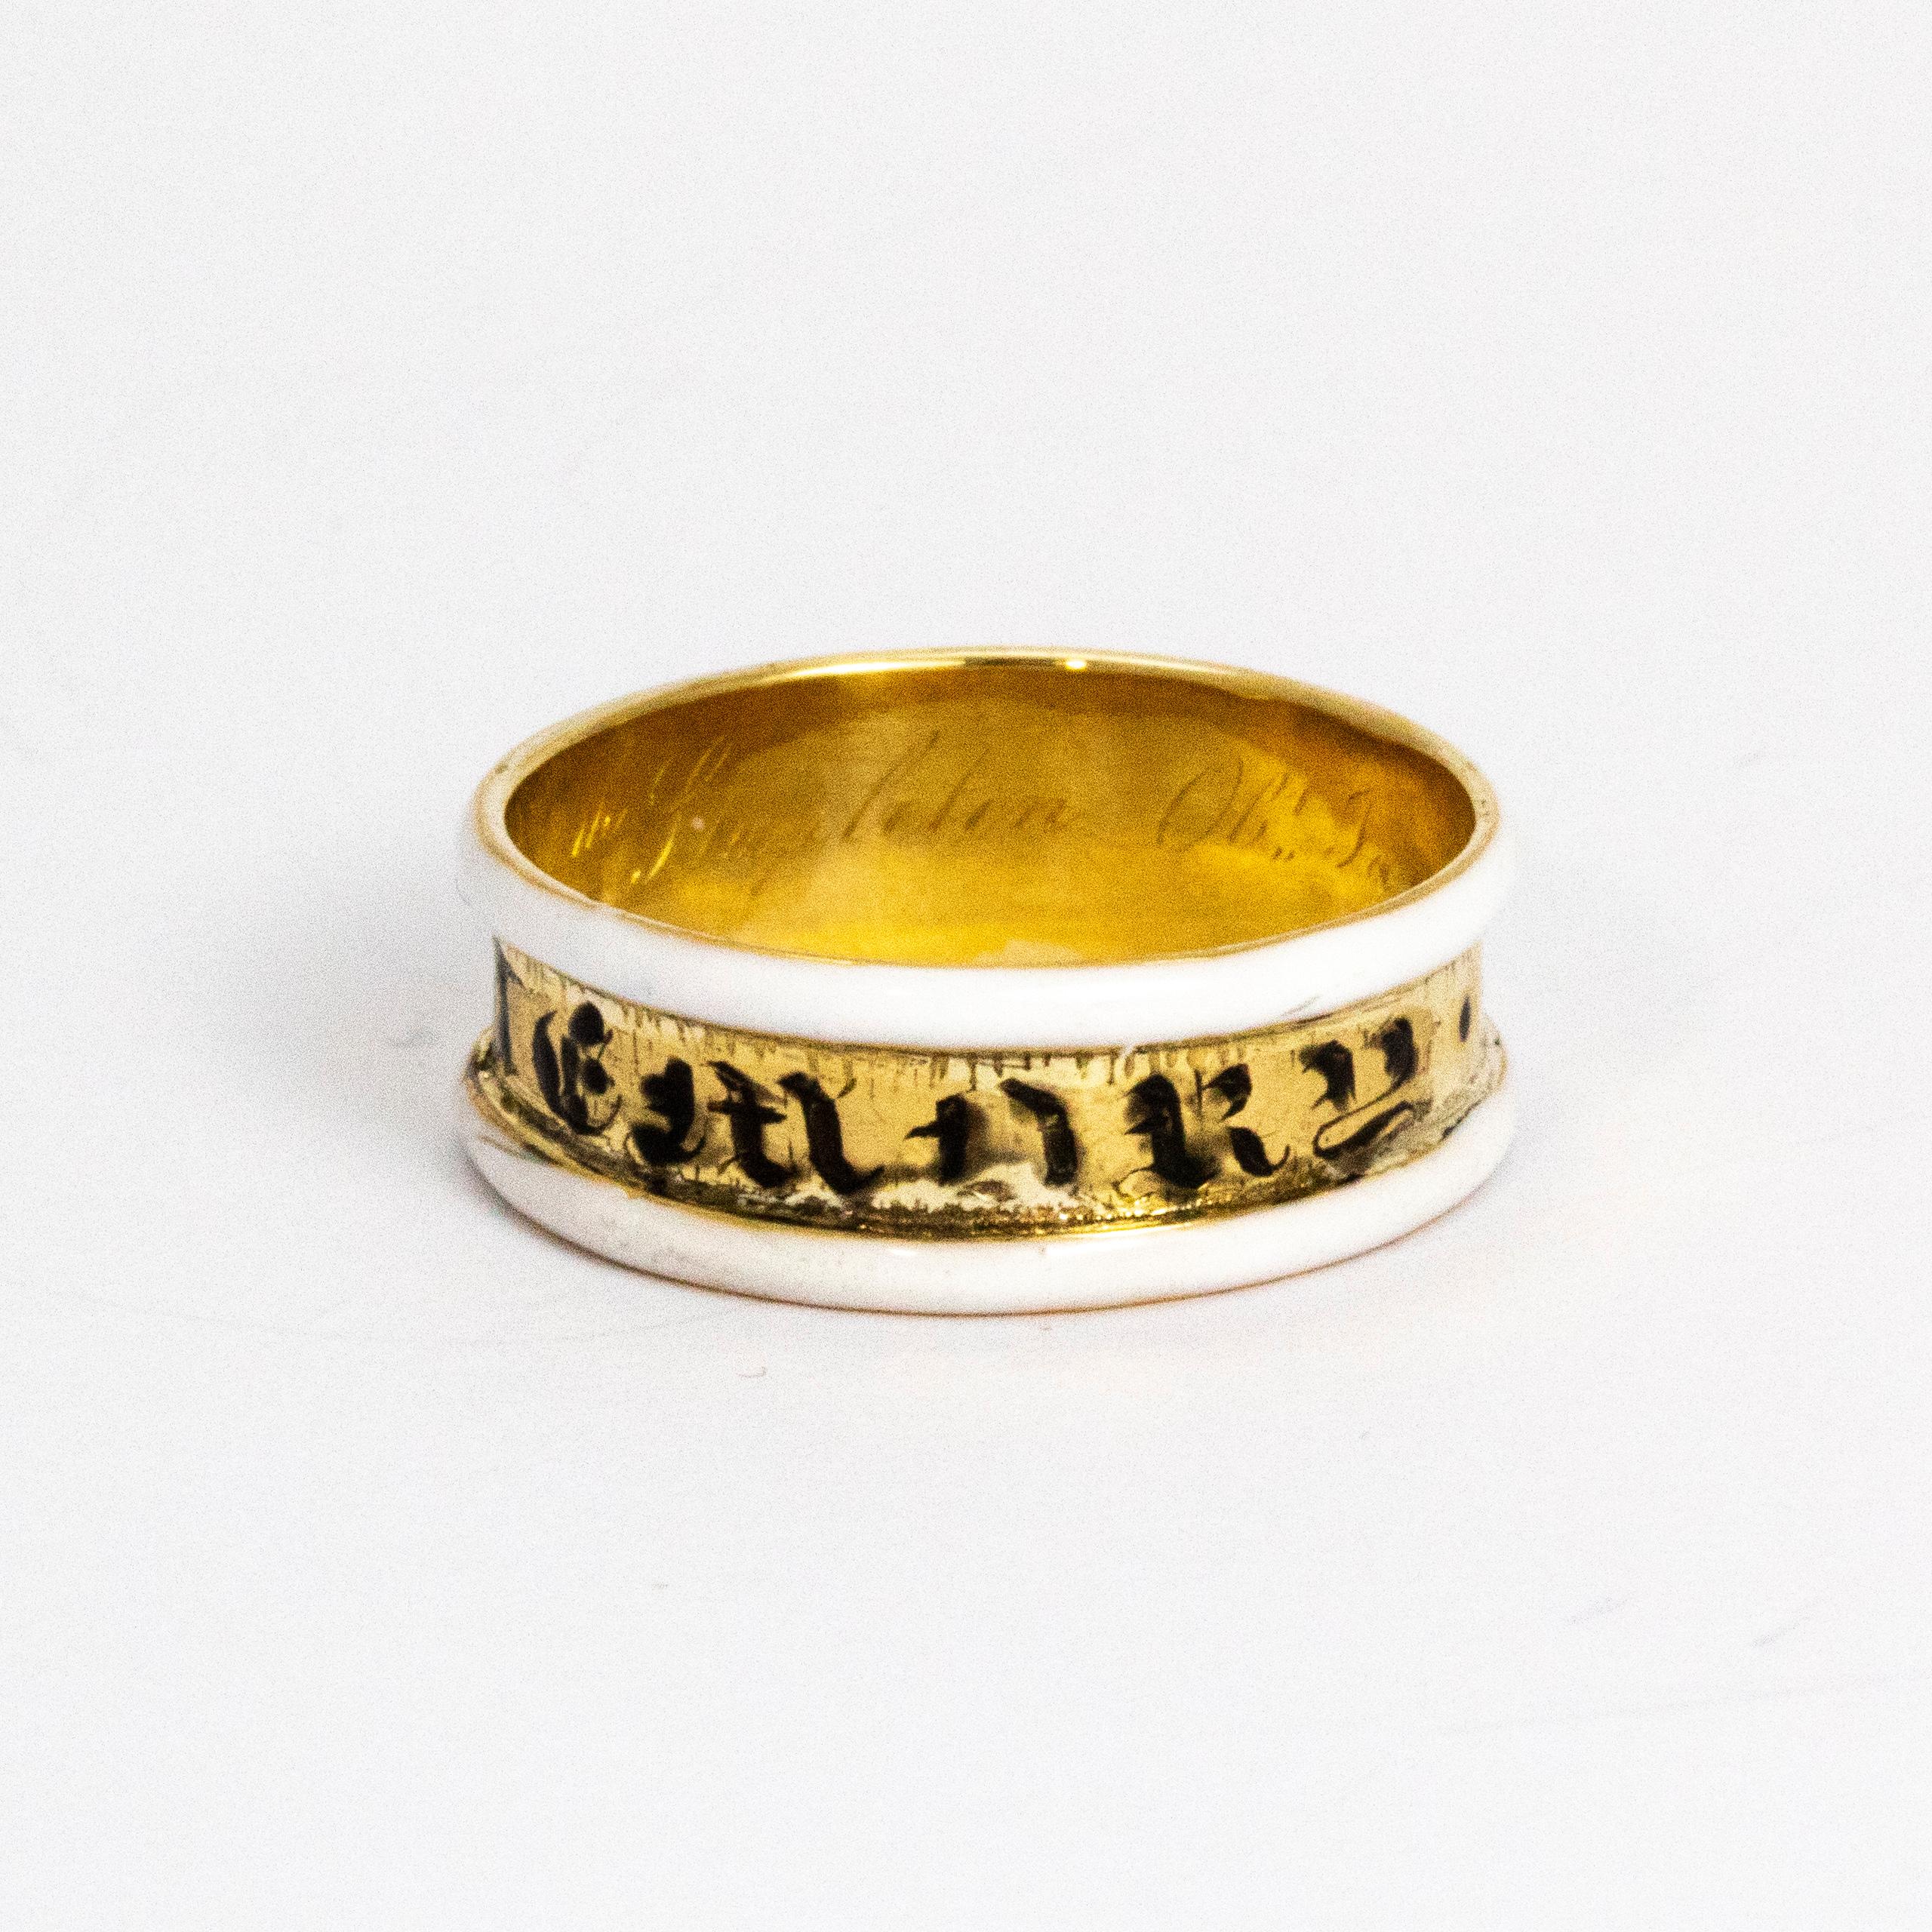 Wonderful example of a 18ct gold Georgian mourning band complete with white and black enamel. Inscription reads 